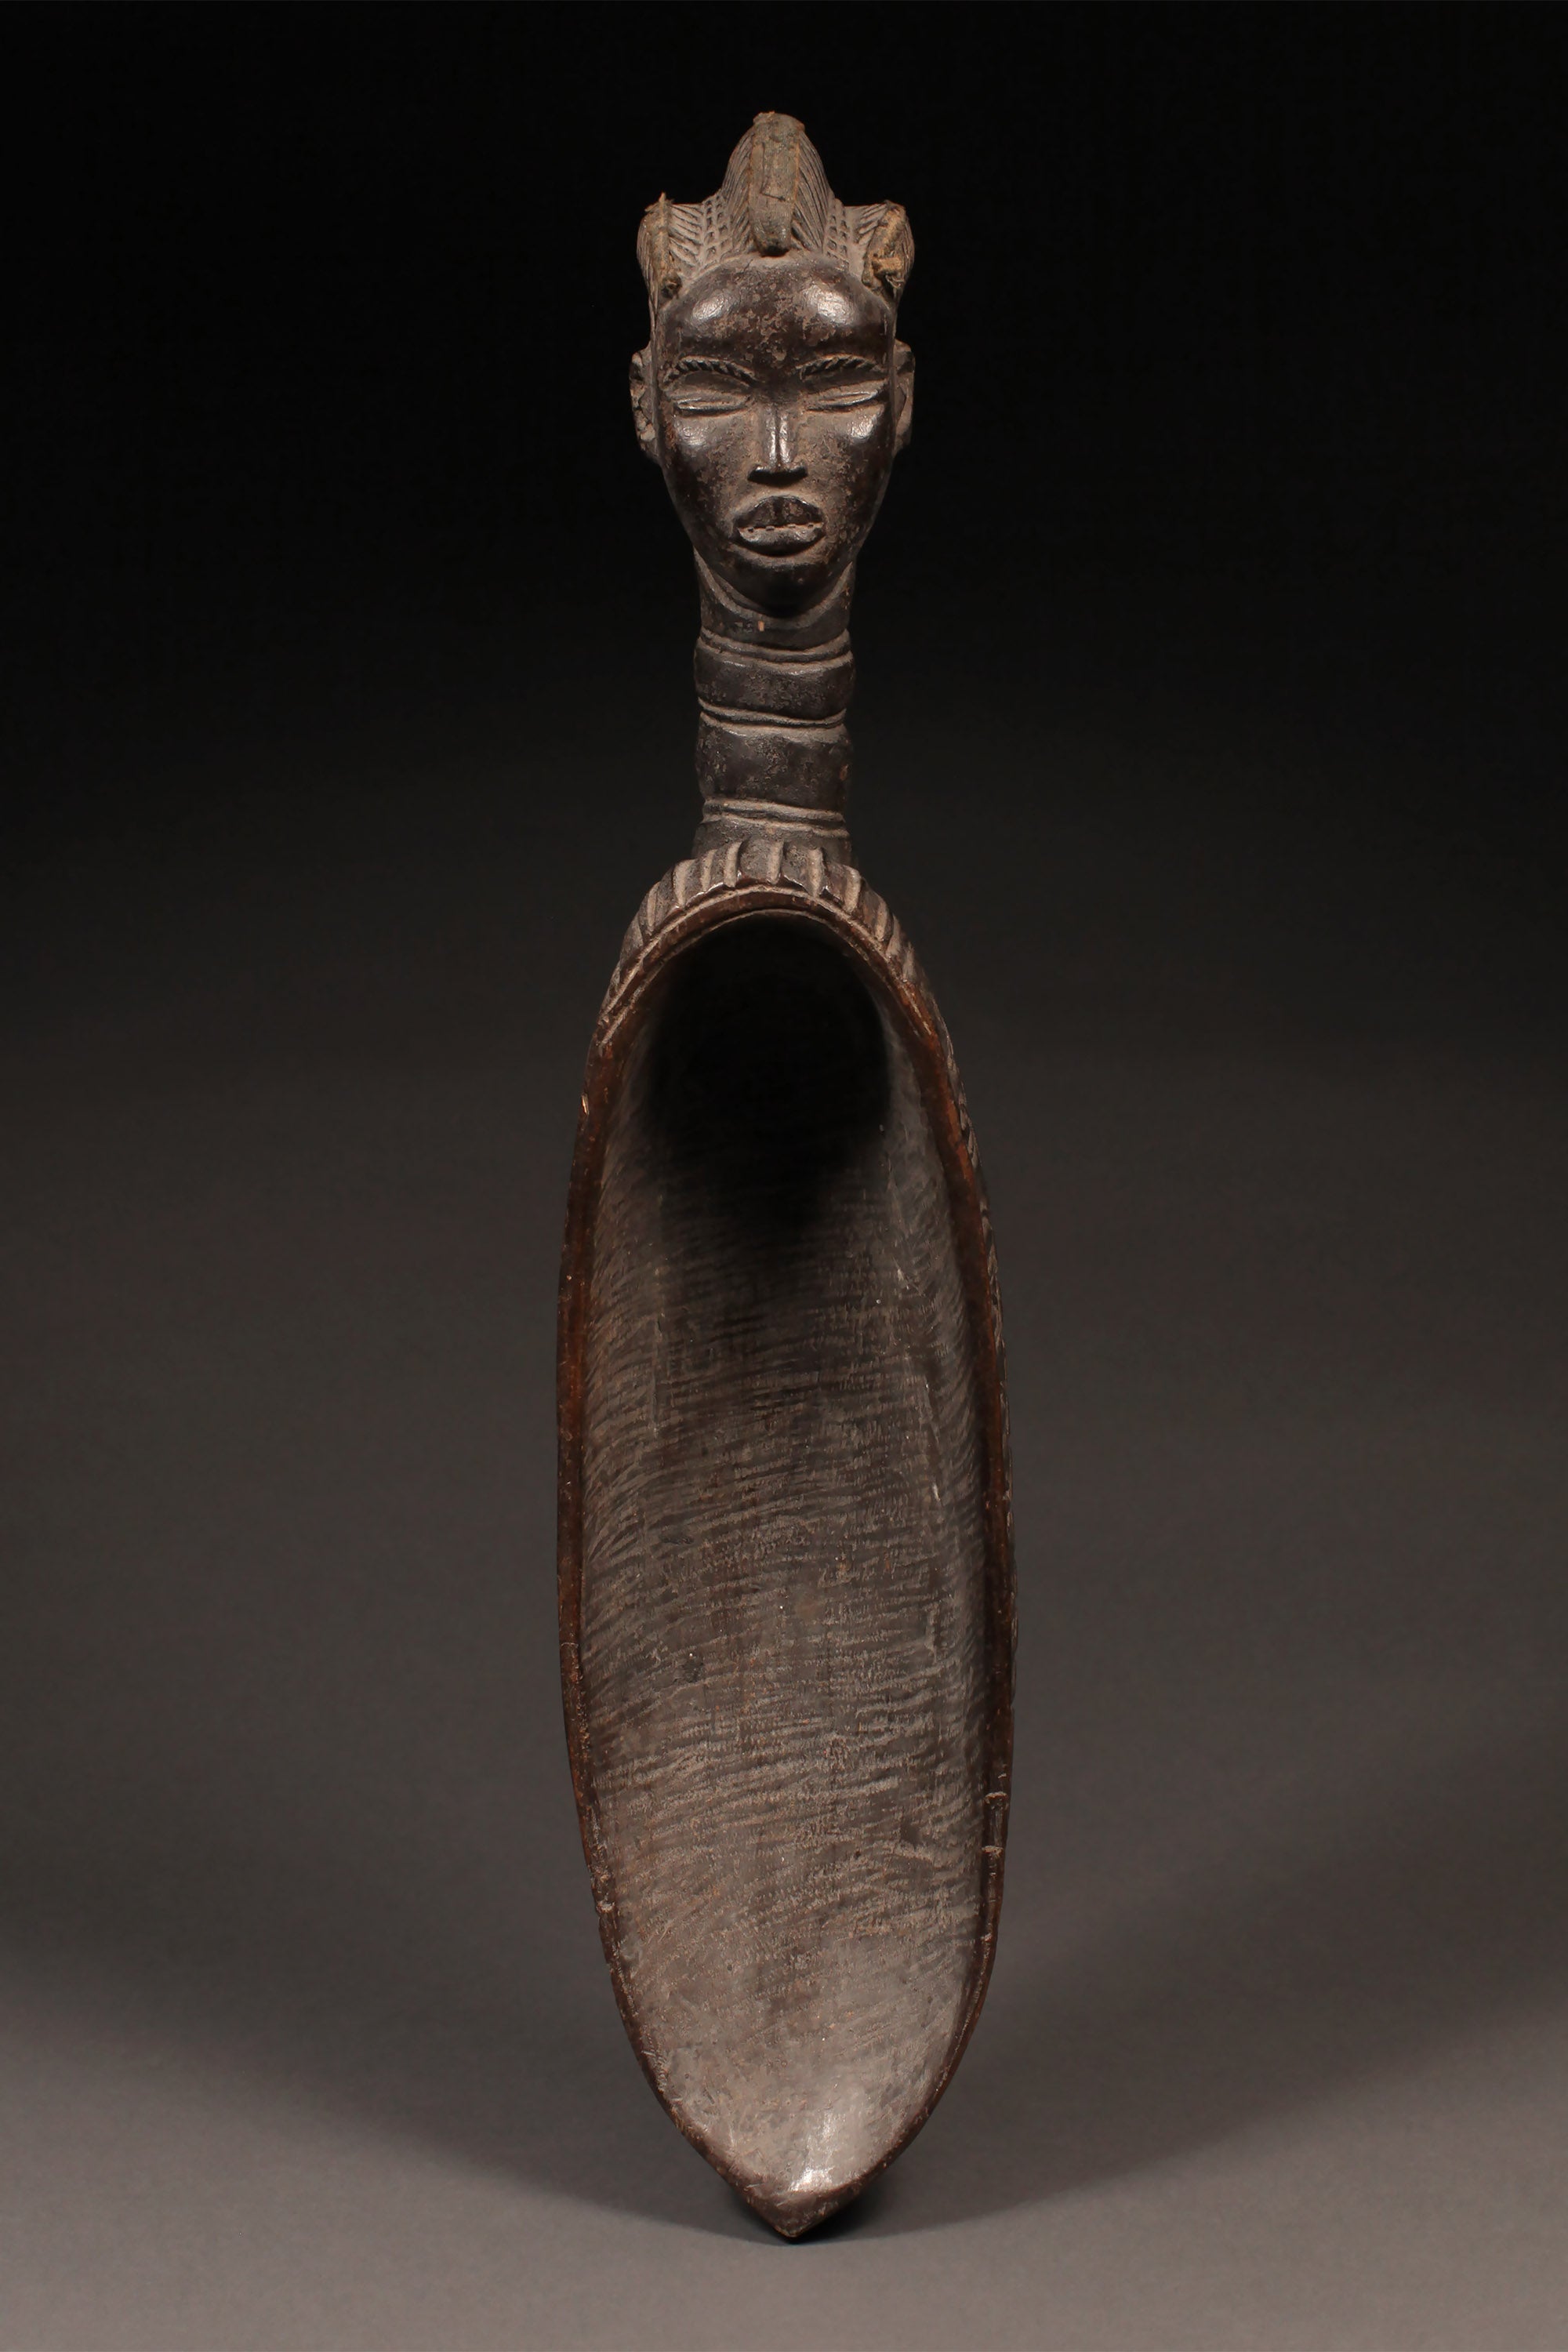 Tribal Objects - Ceremonial - Artwork - African - Folk Art - Artifacts - Dan Ladle Spoon -  Wood -  Used - Sculpture - Collectible